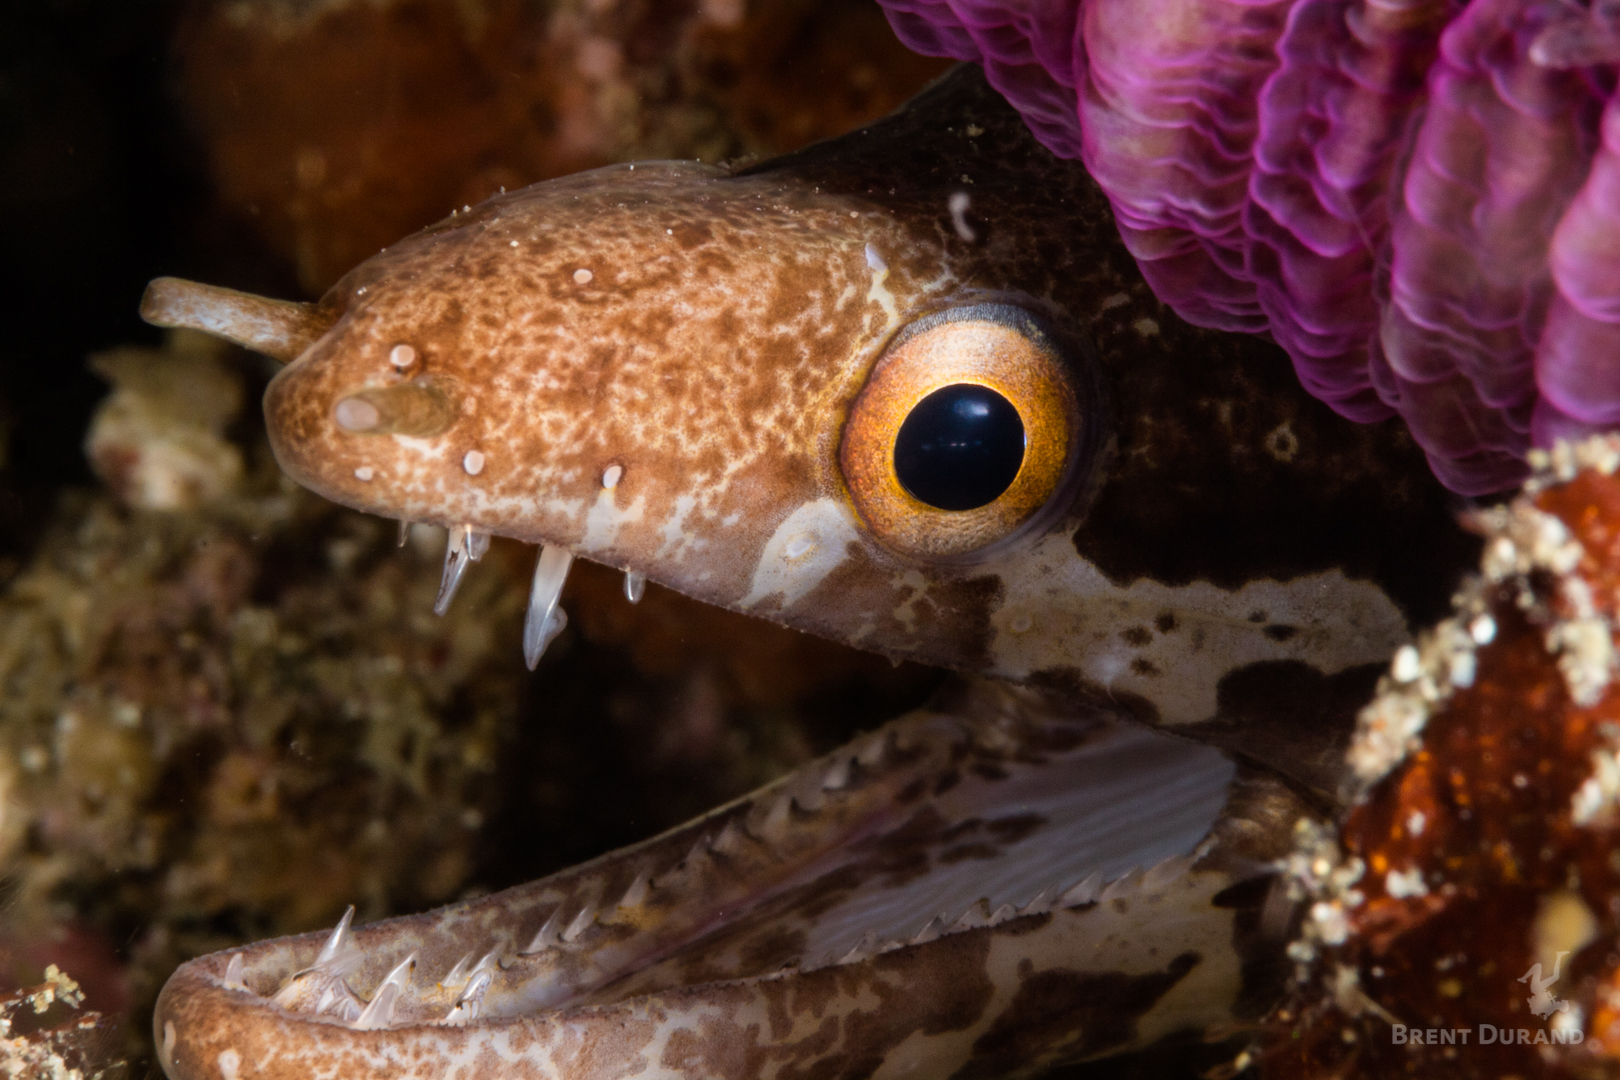 A barred-fin moray eel eyes the camera in this intimate portrait.